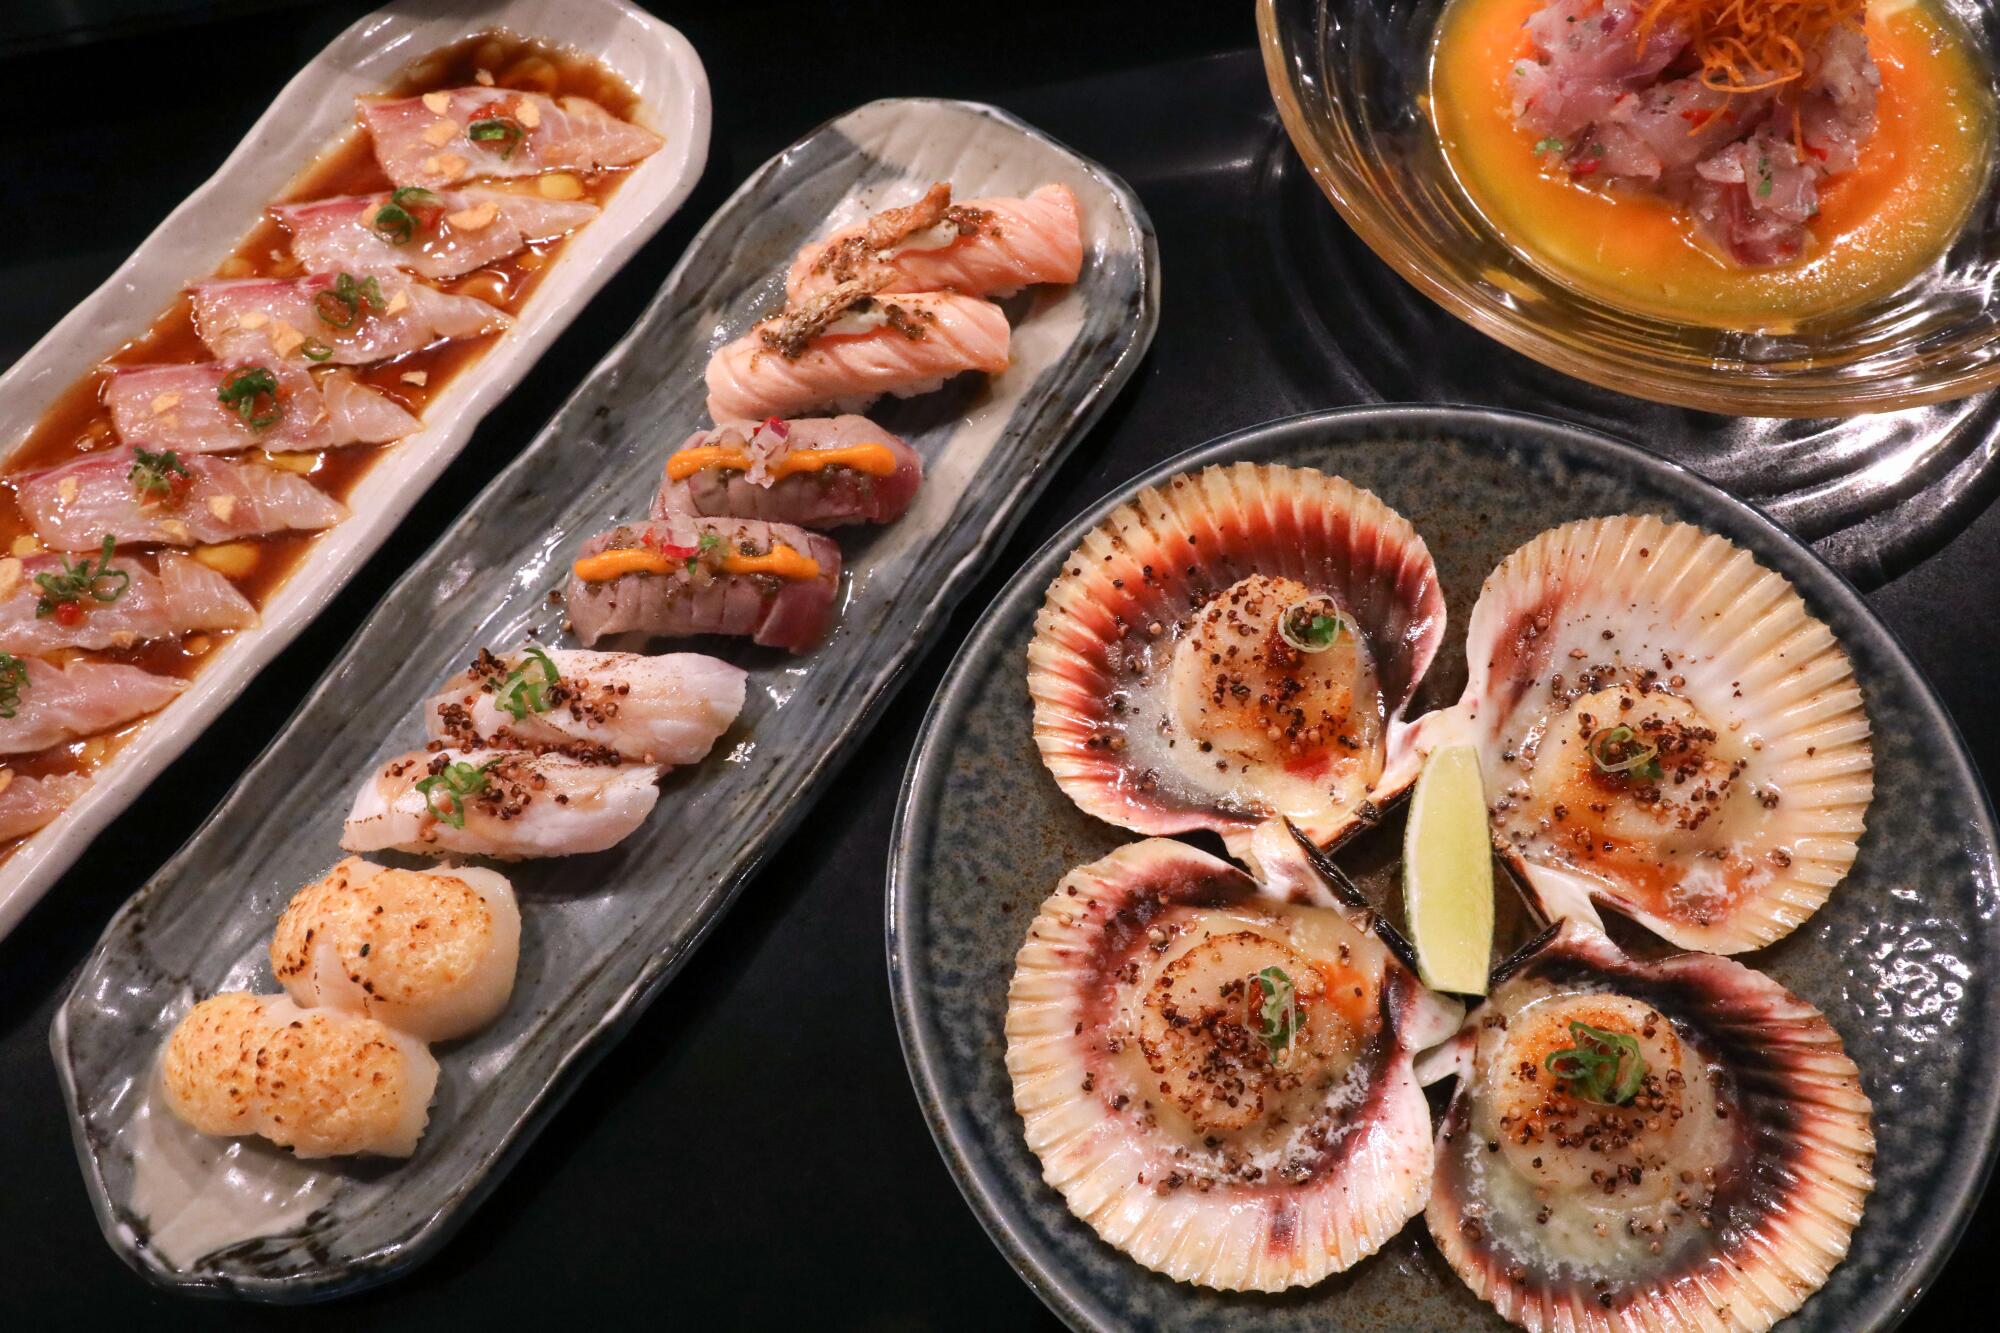 Four dishes including sushi and open scallops